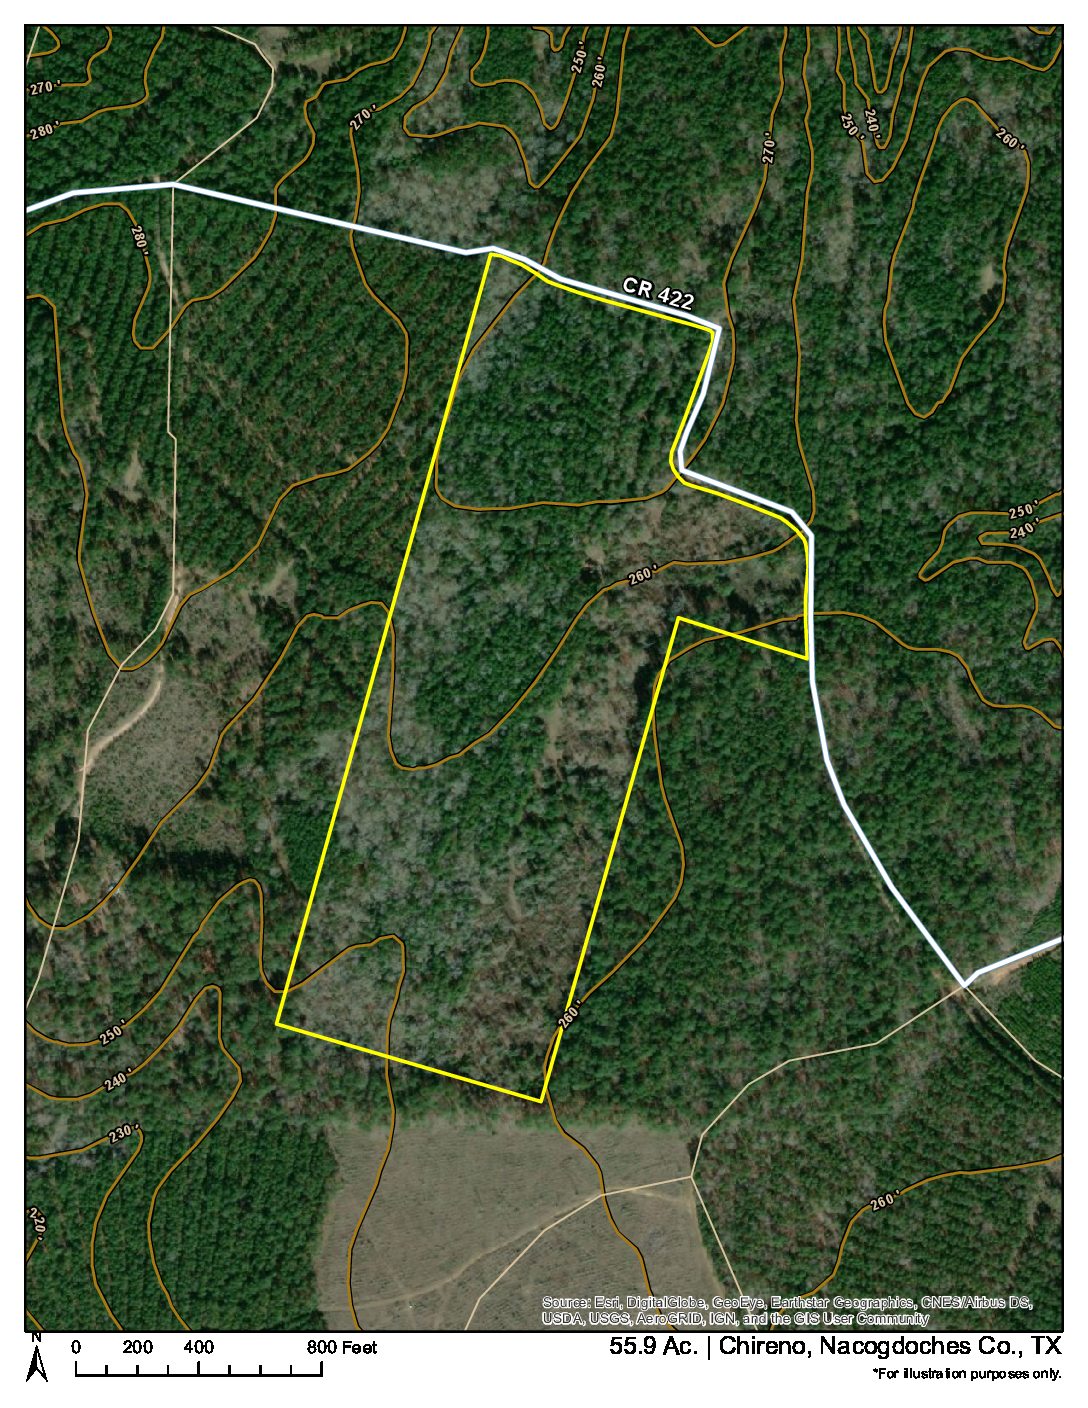 Topography of 55 acres on County Road 422 in Nacogdoches County, Texas